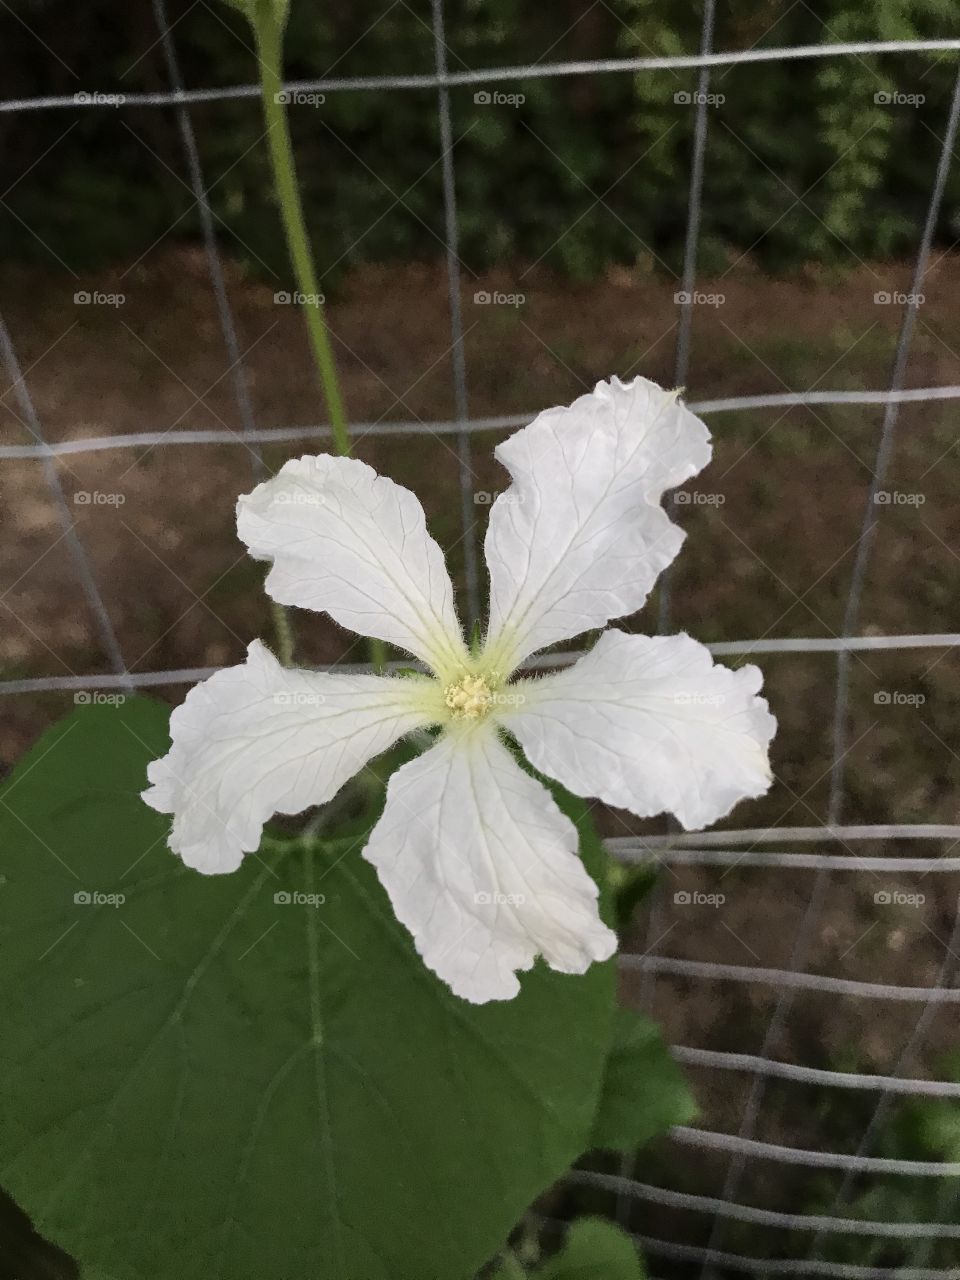 Our first bloom on our gourd plants!